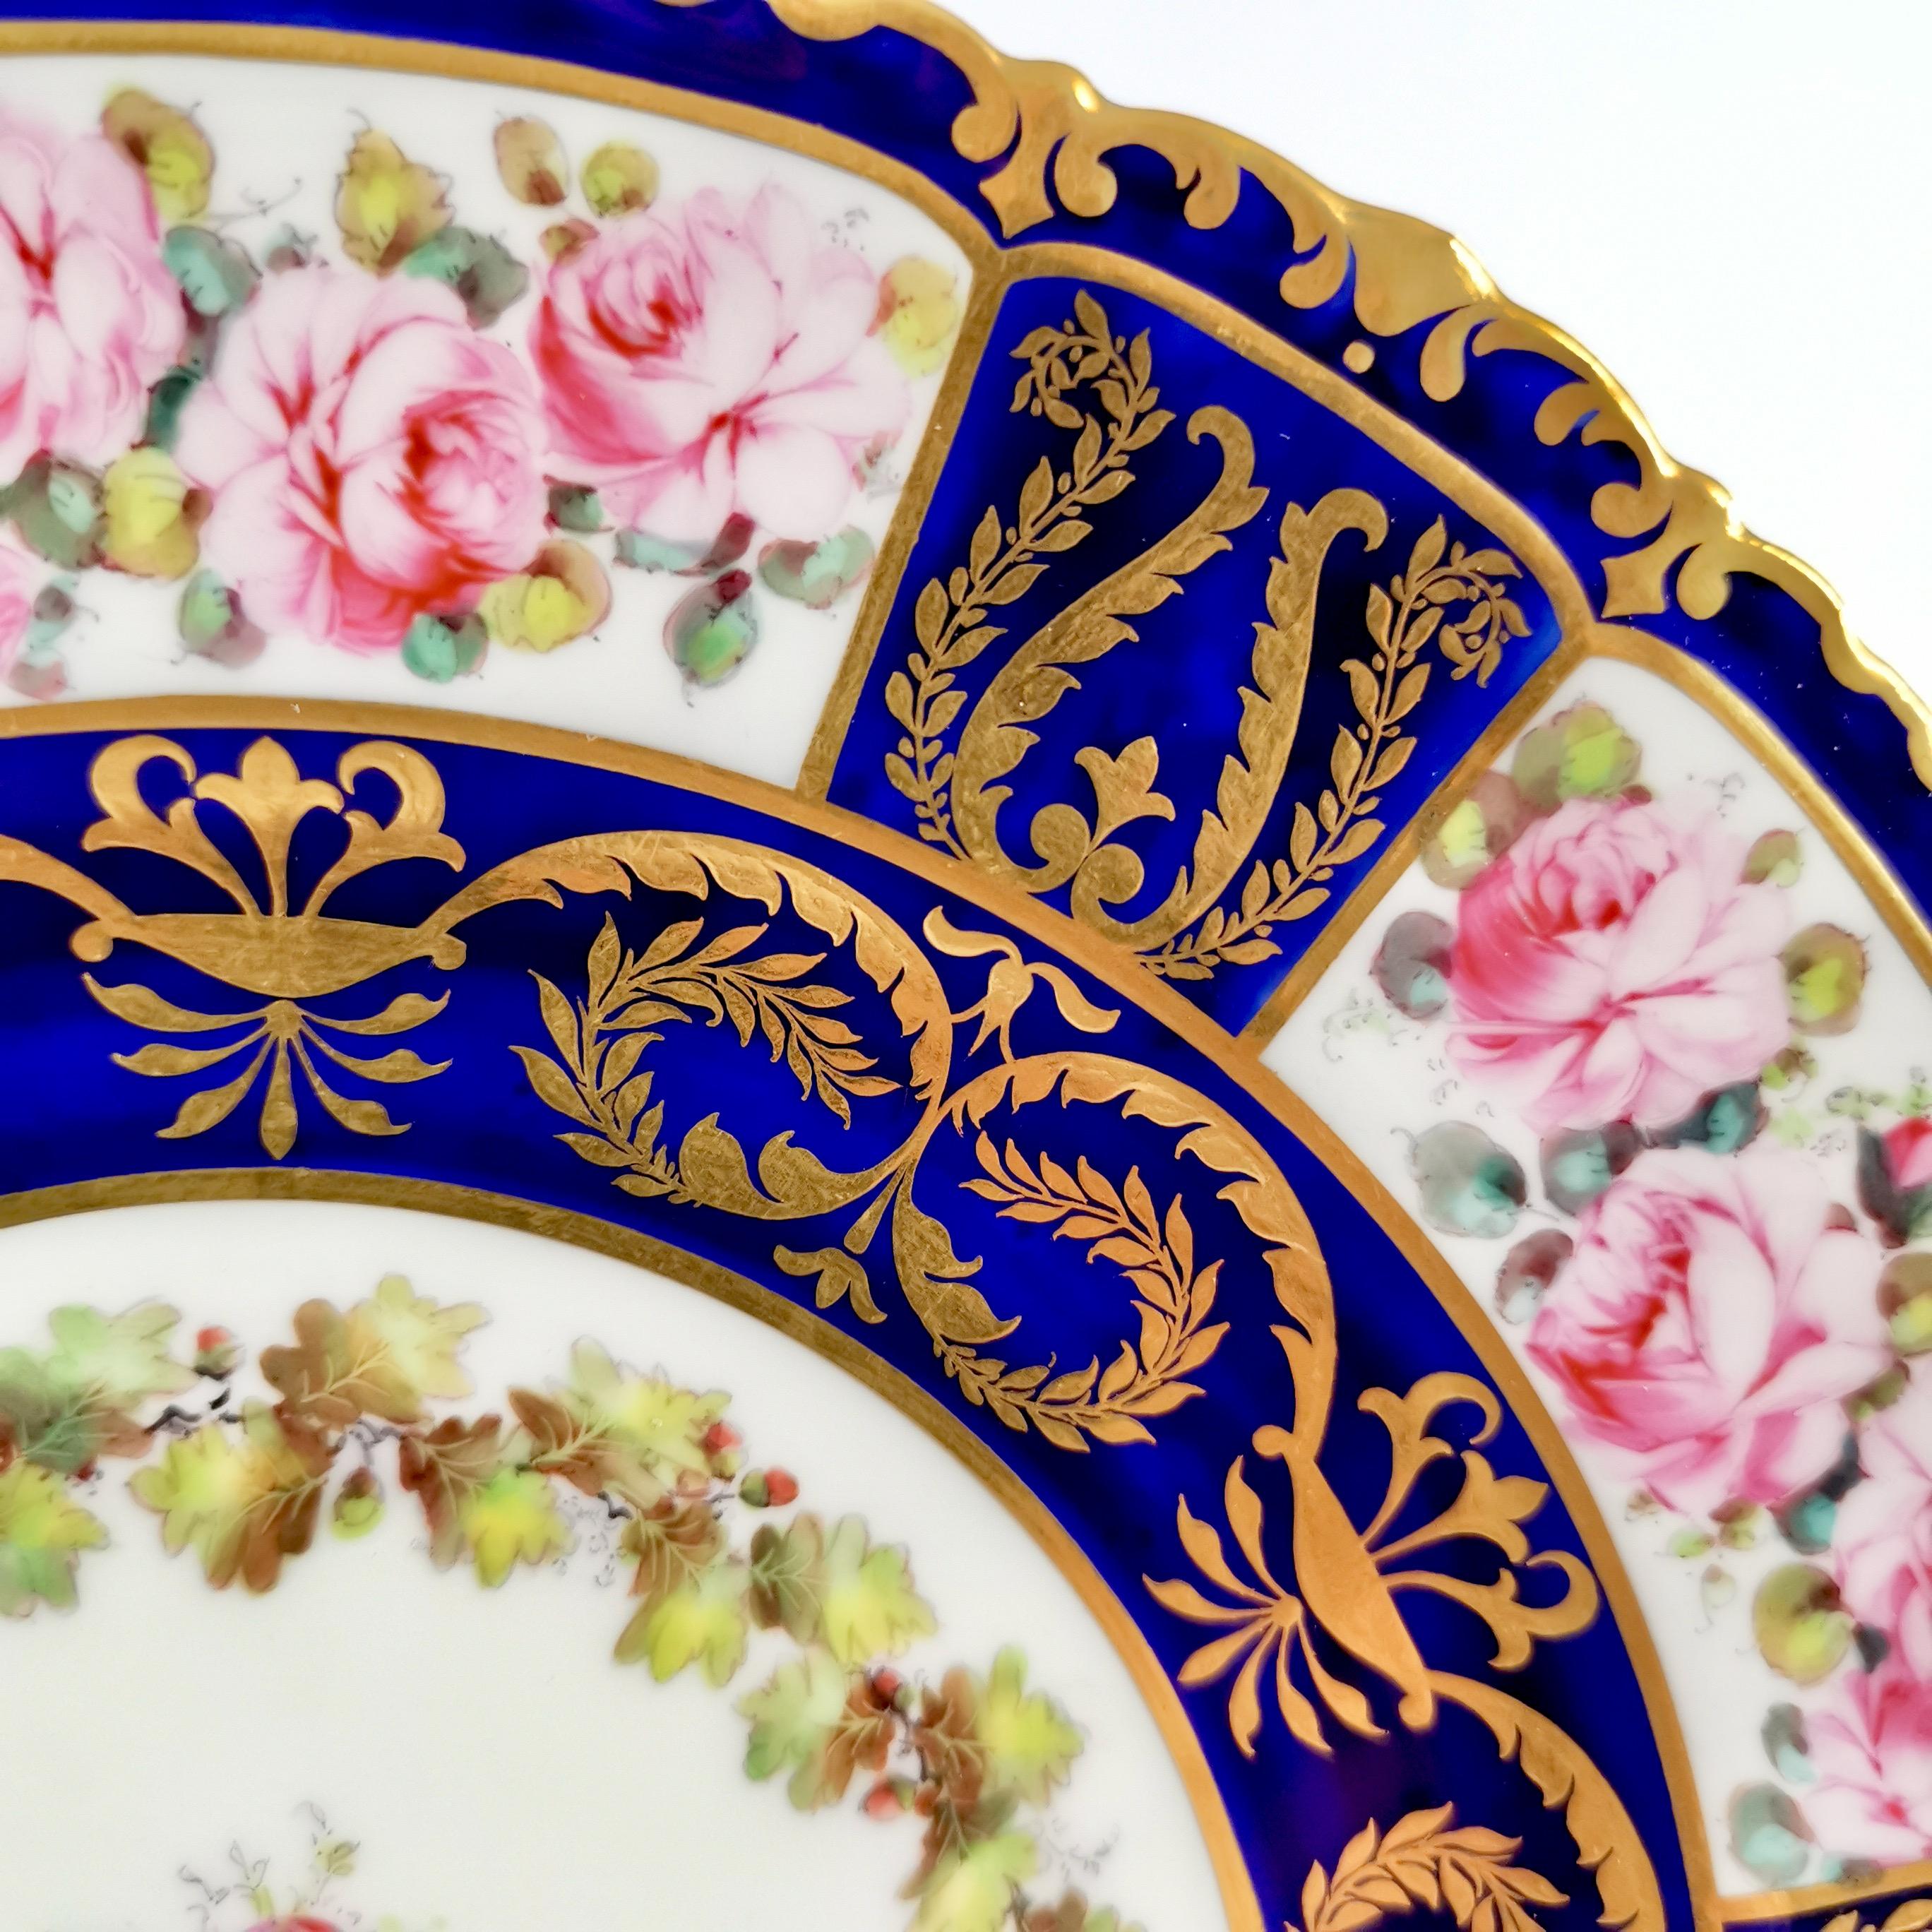 English Royal Crown Derby Porcelain Plate, Pink Roses by A. Gregory, Victorian, 1899